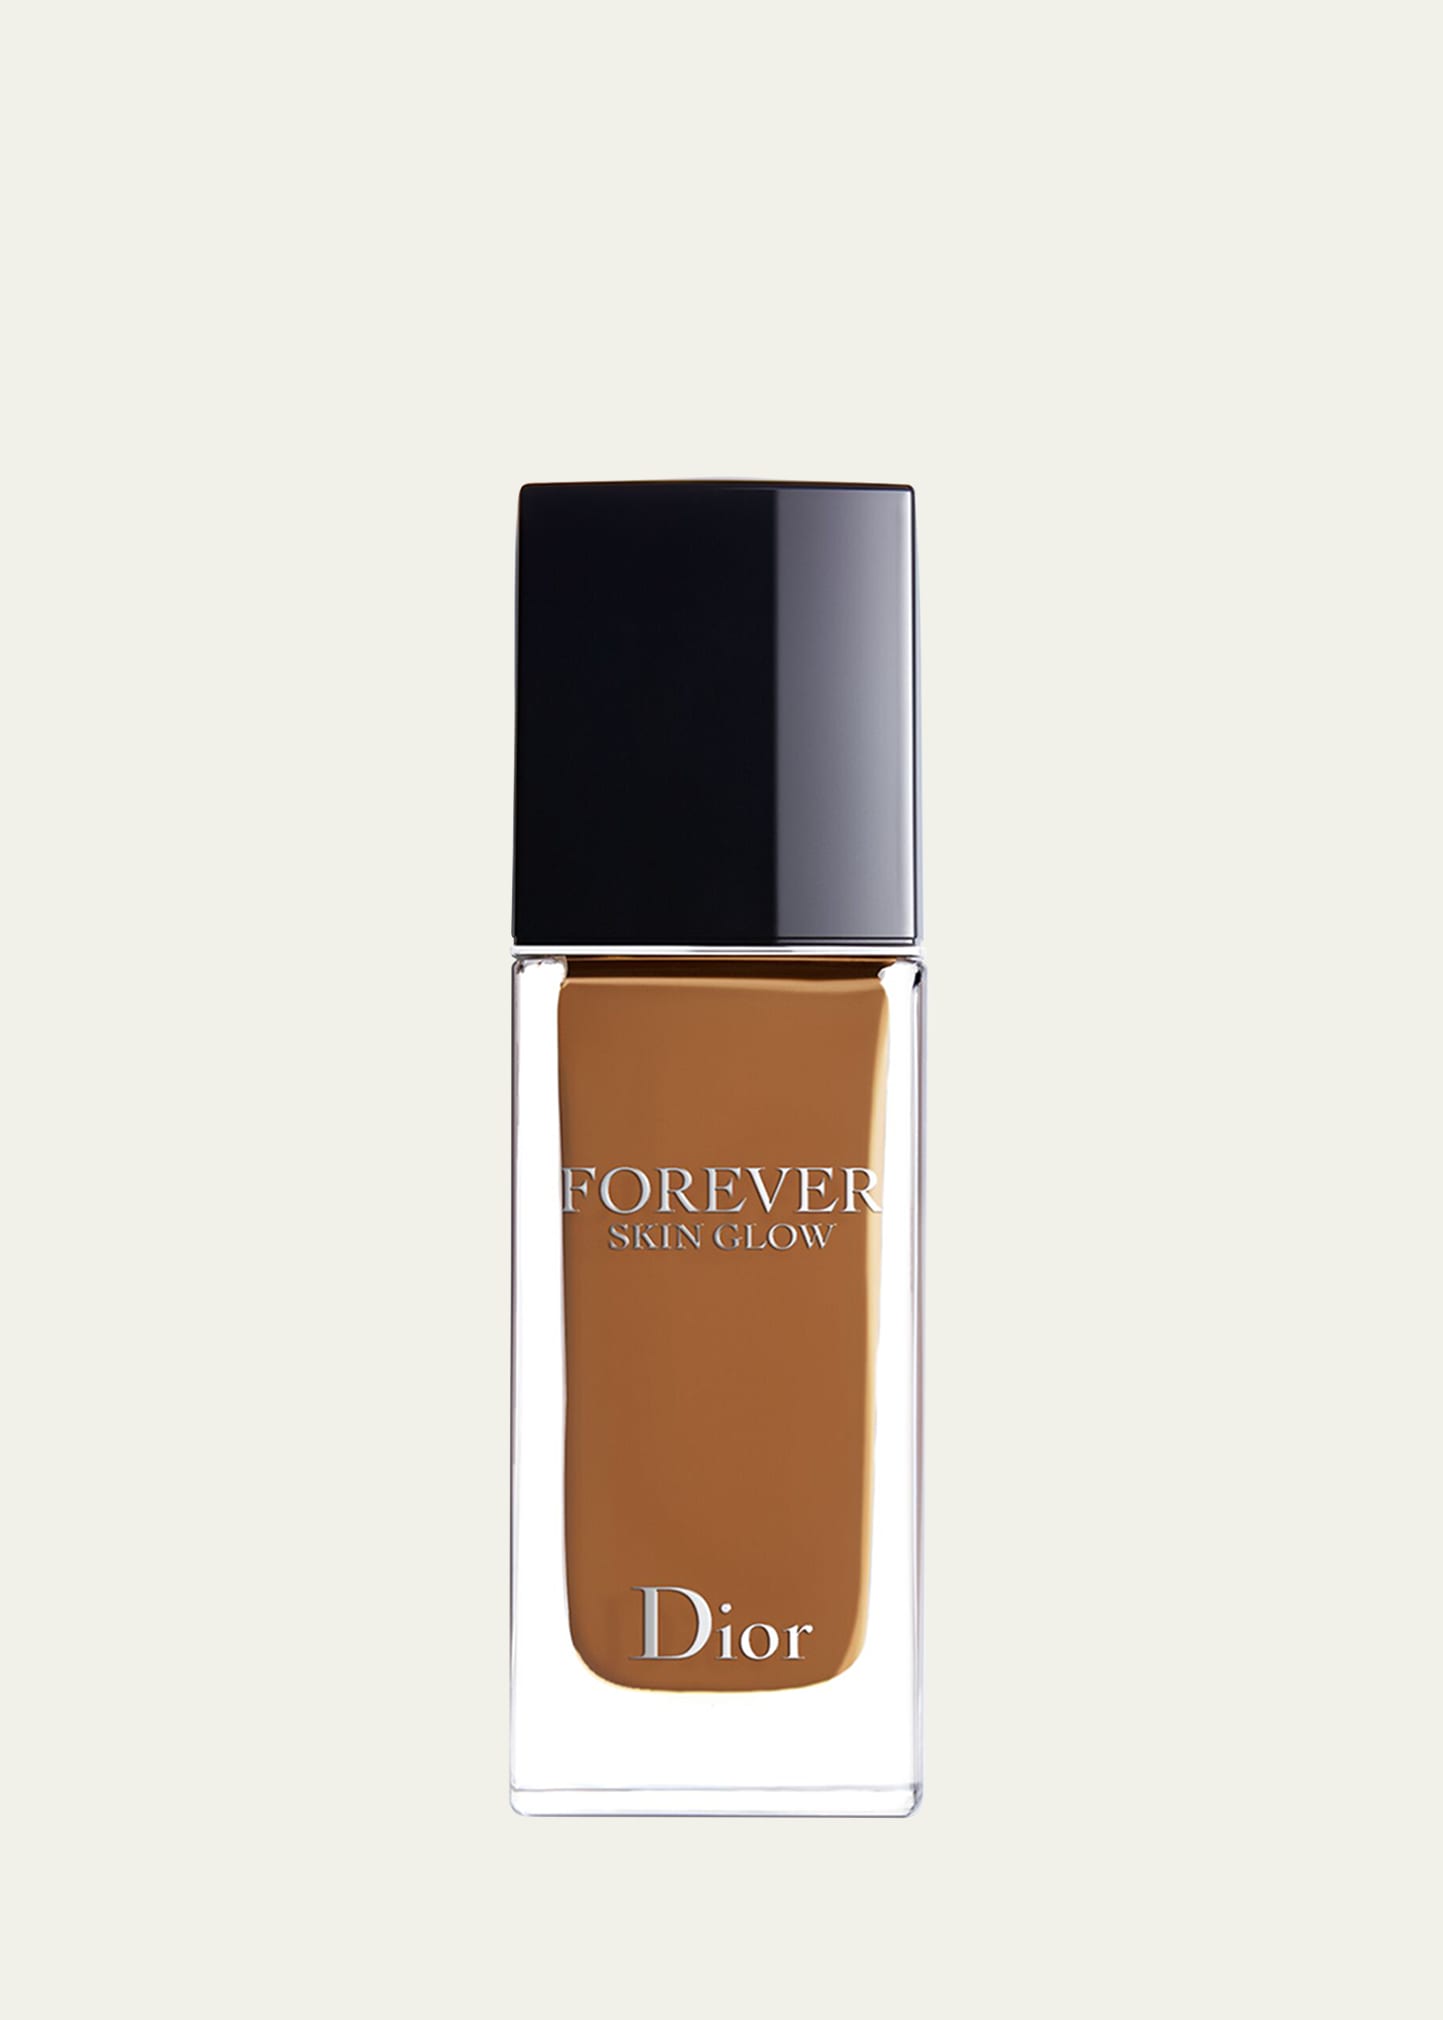 Dior 1 Oz.  Forever Skin Glow Hydrating Foundation Spf 15 In 7 Neutral